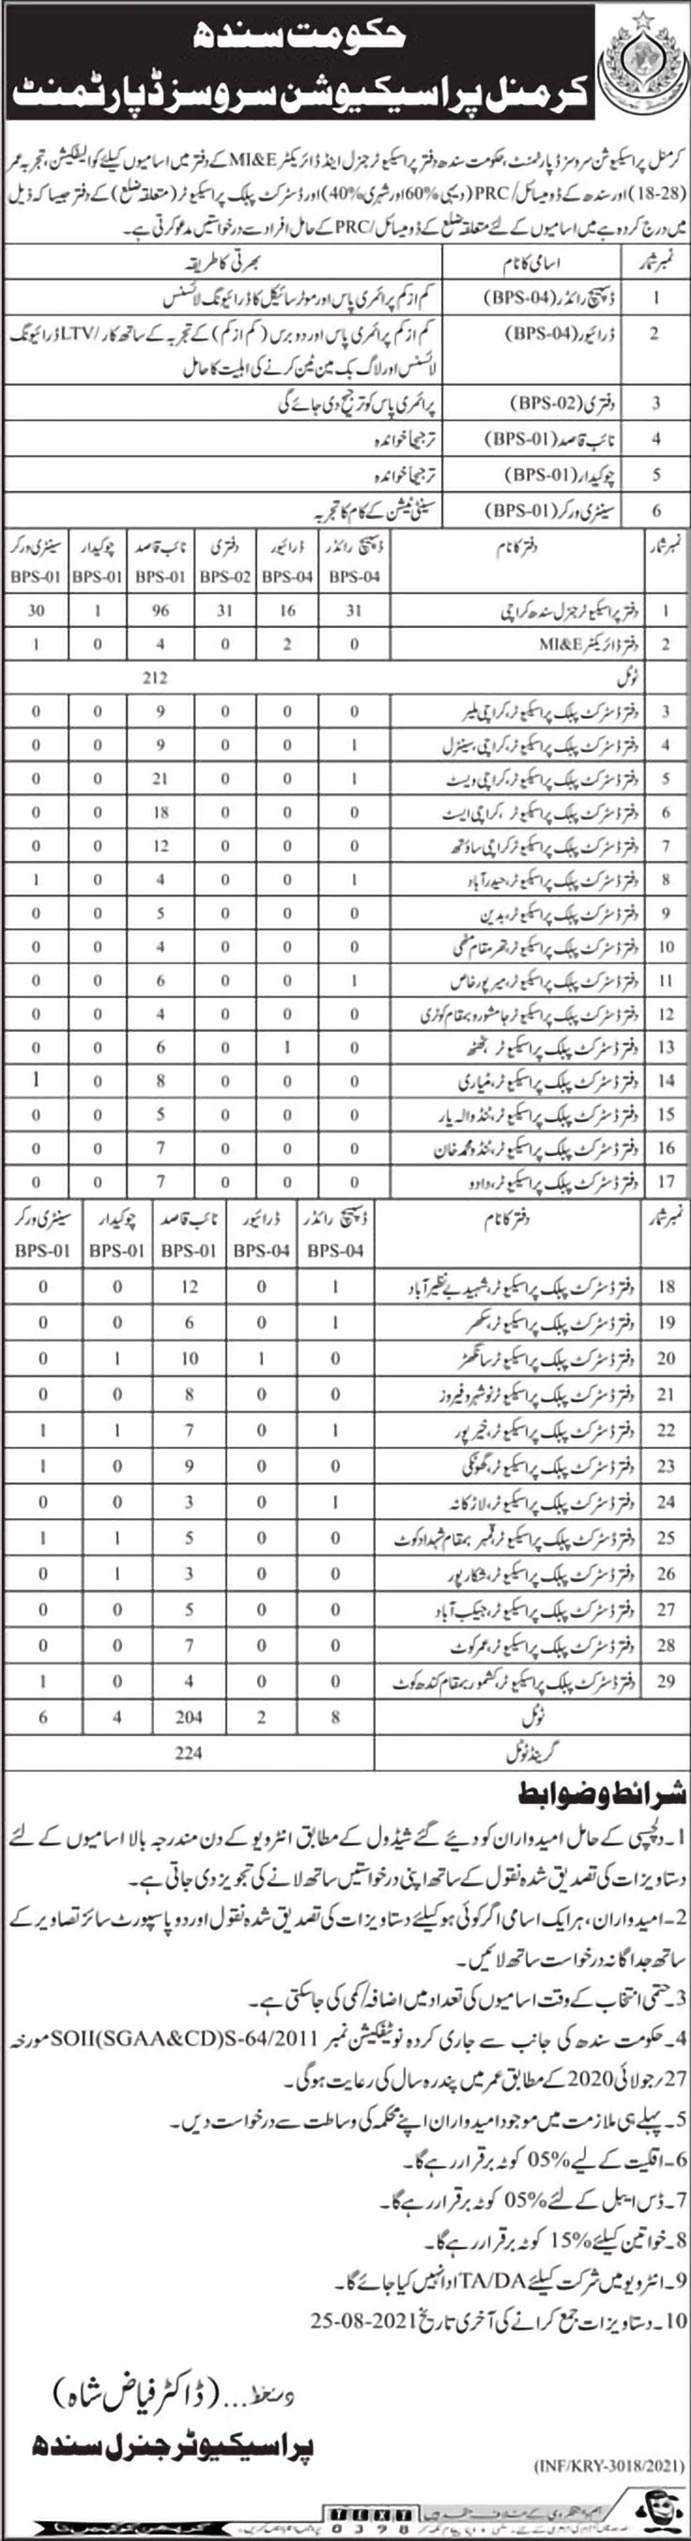 Dispatch Rider new Jobs in Law Parliamentary Affairs & Criminal Prosecution Department